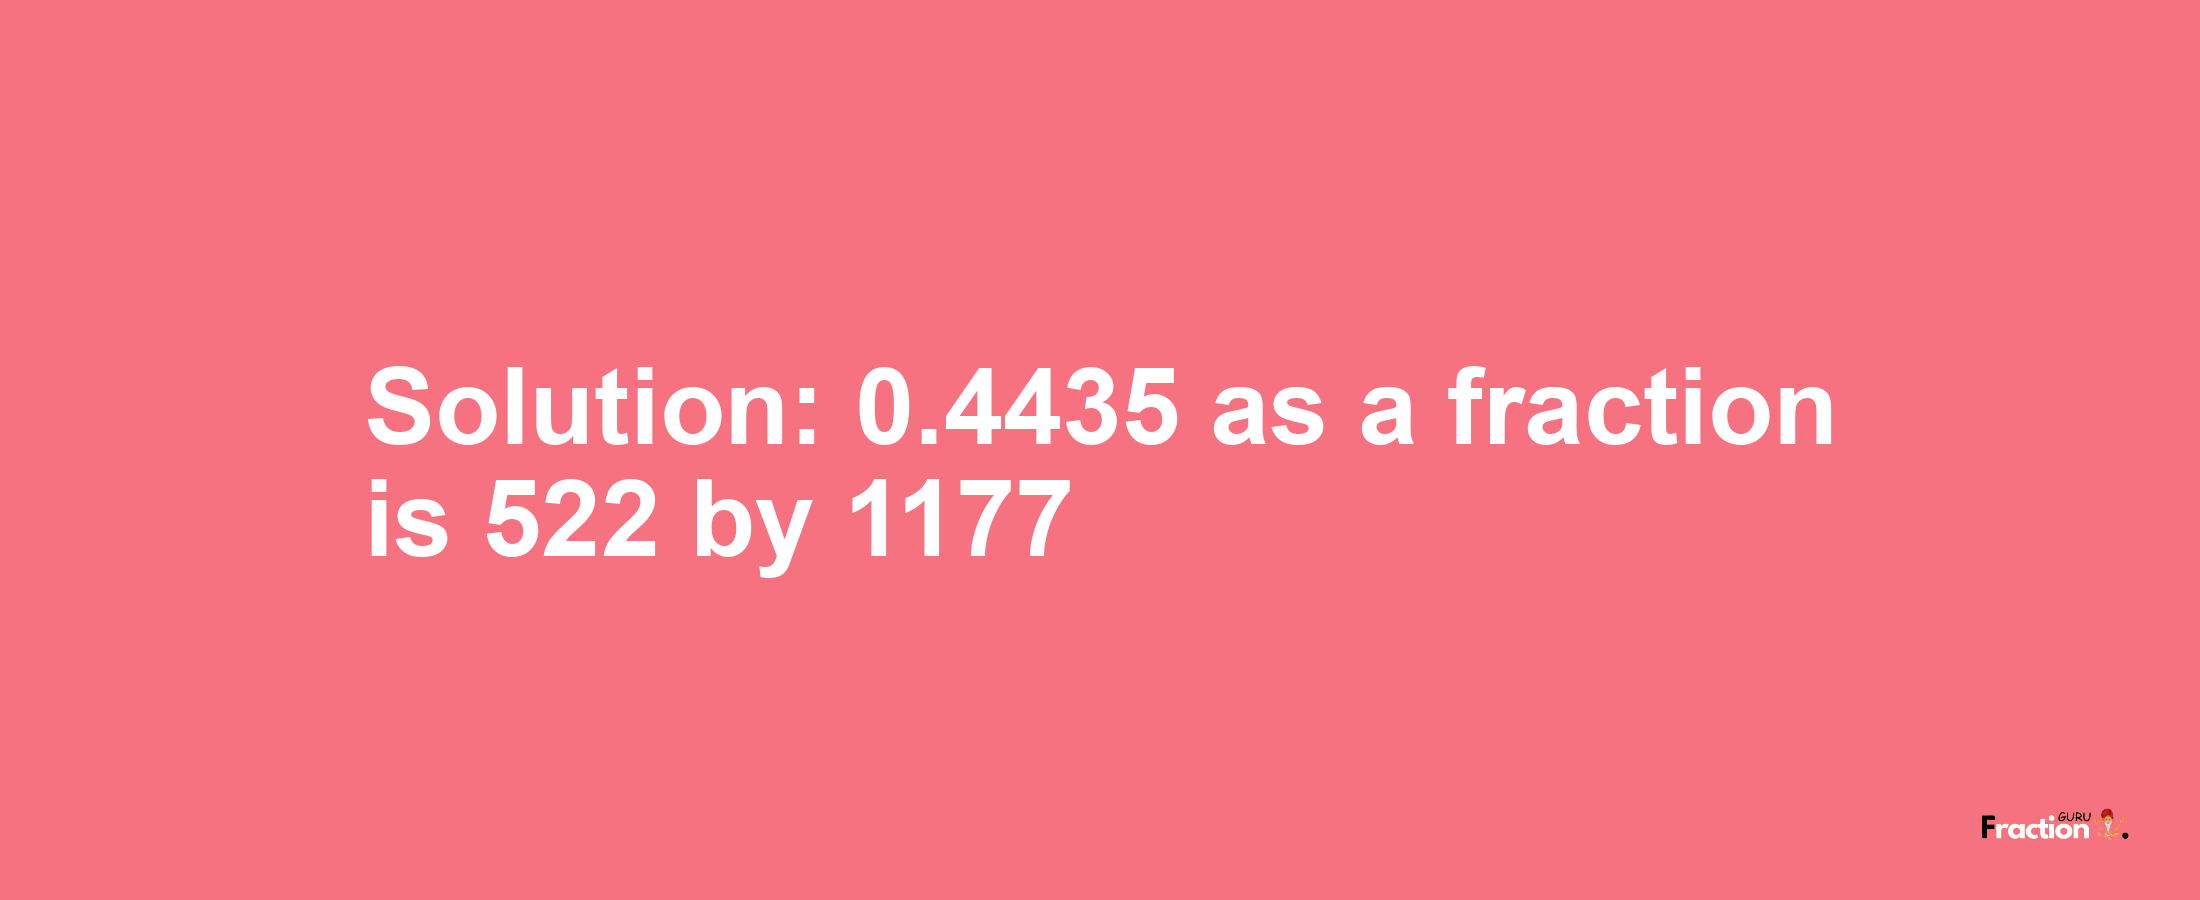 Solution:0.4435 as a fraction is 522/1177